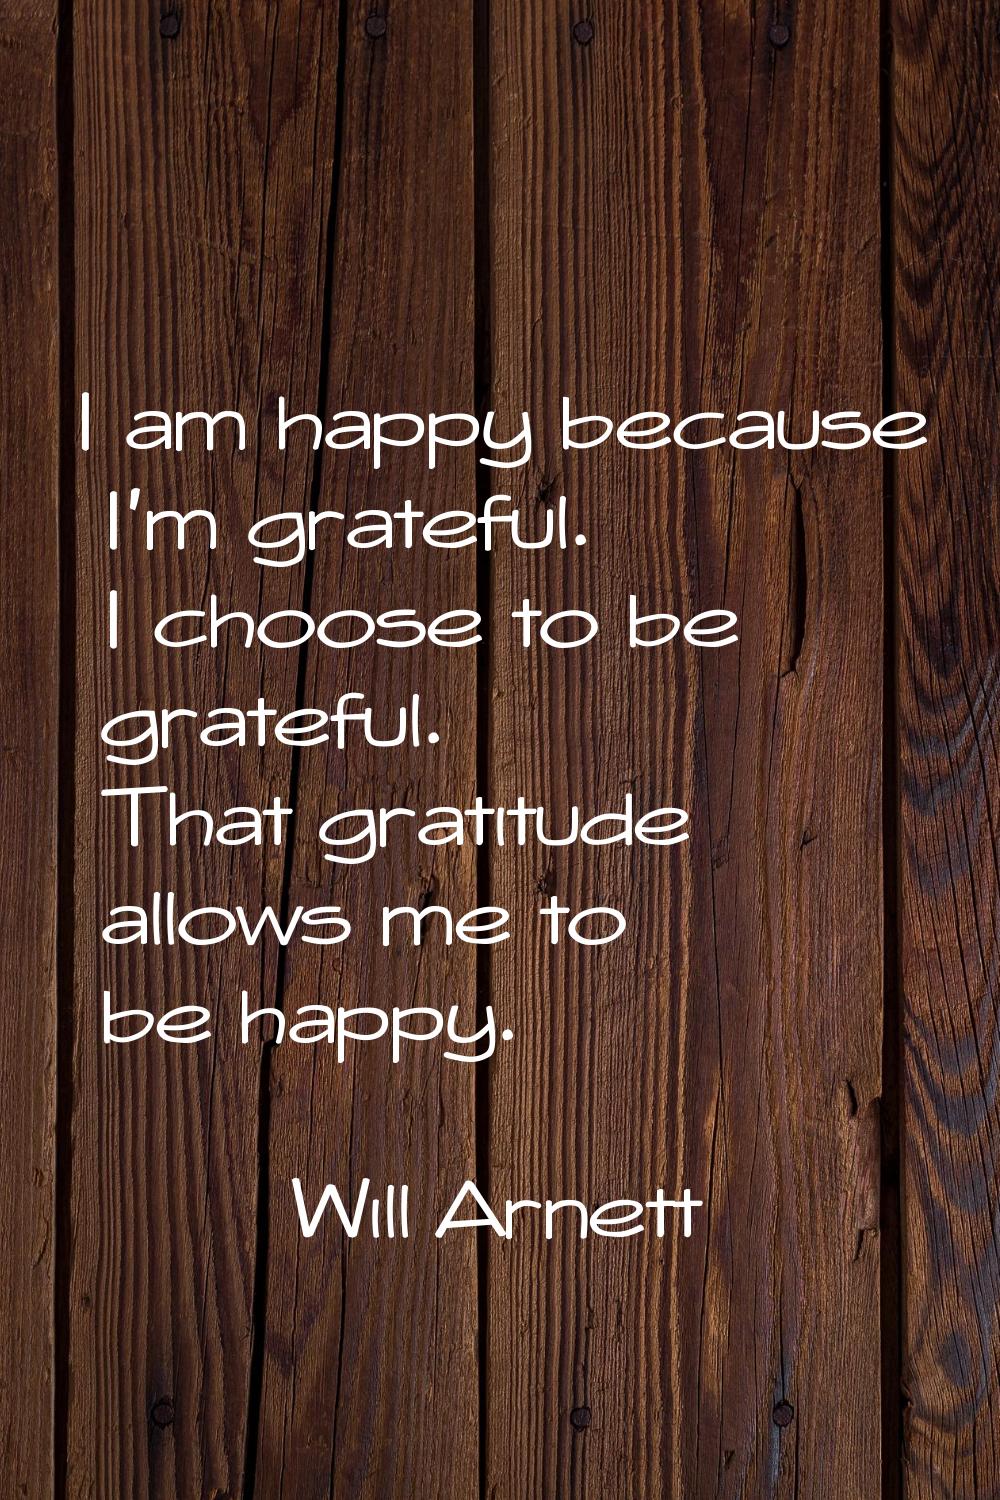 I am happy because I'm grateful. I choose to be grateful. That gratitude allows me to be happy.